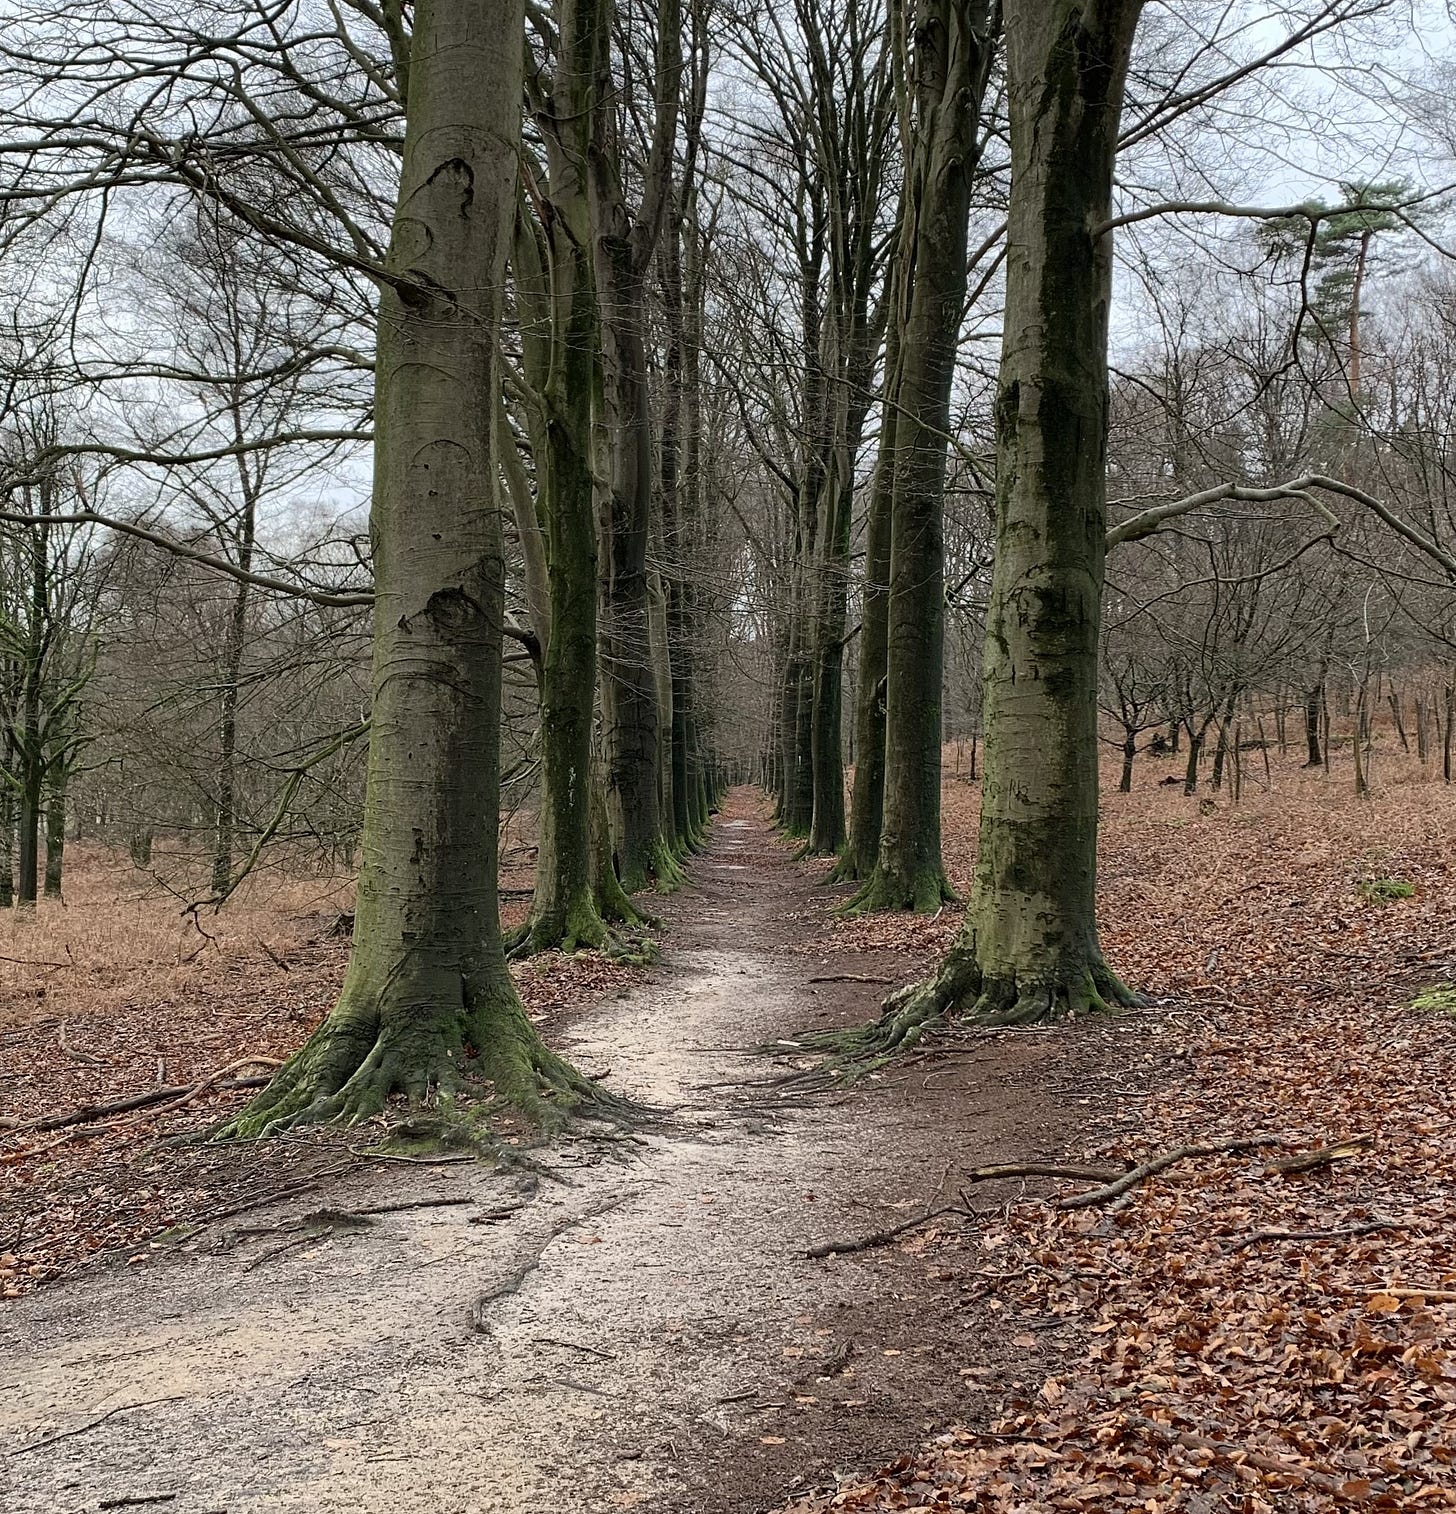 Photograph of a muddy path through a forest, lined on either side by tall bare trees.